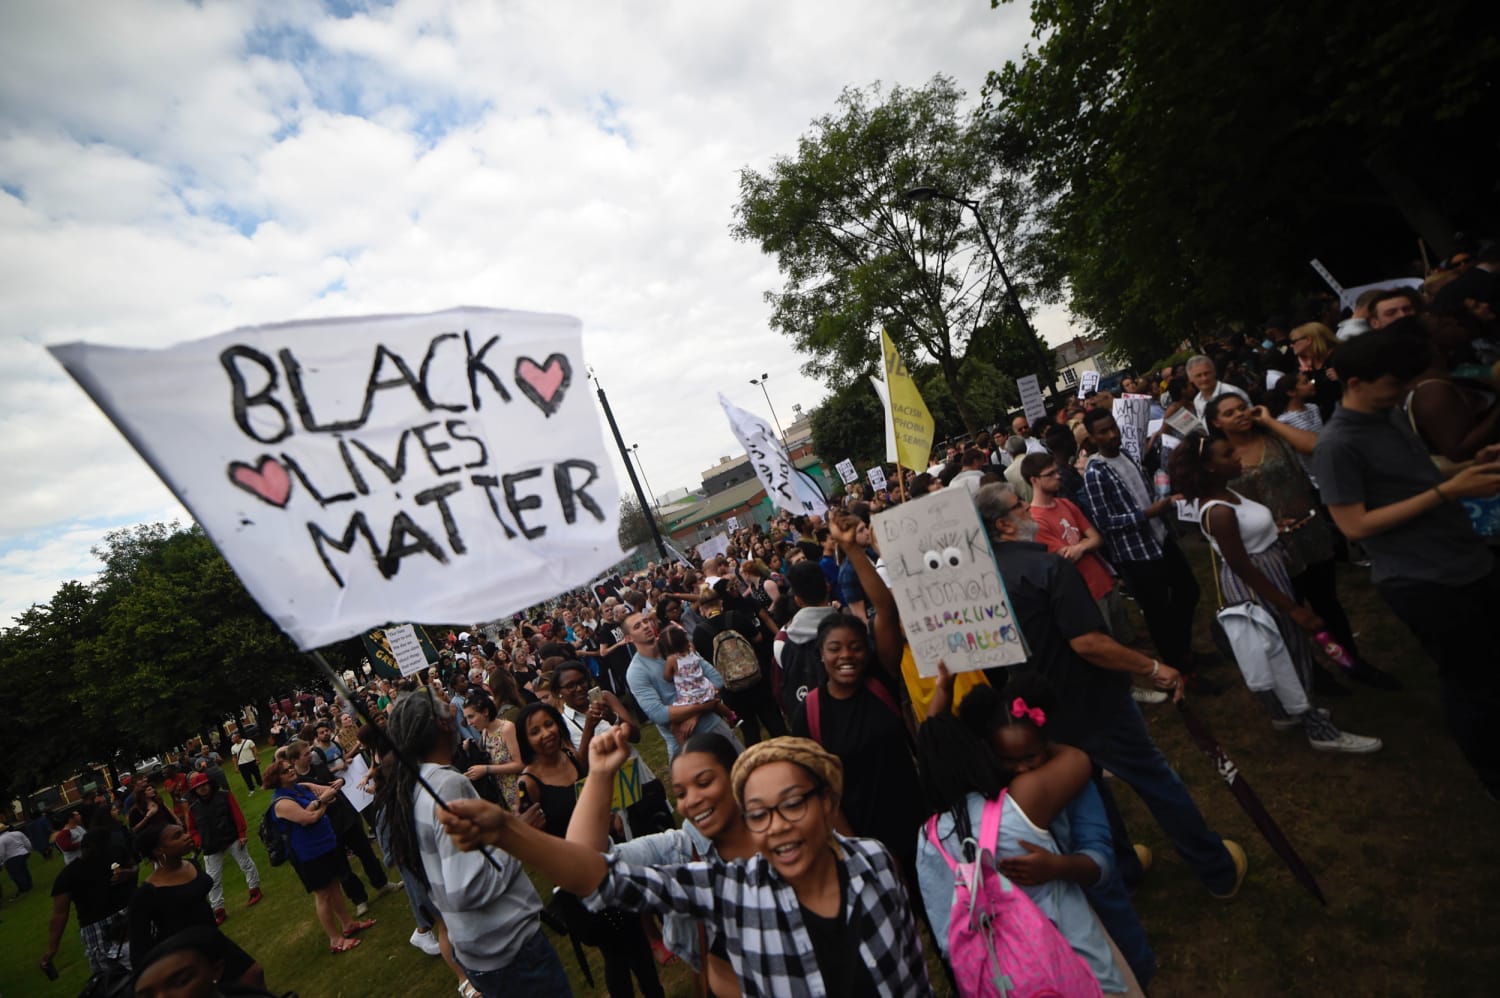 The worldwide protests that Black Lives Matter inspired